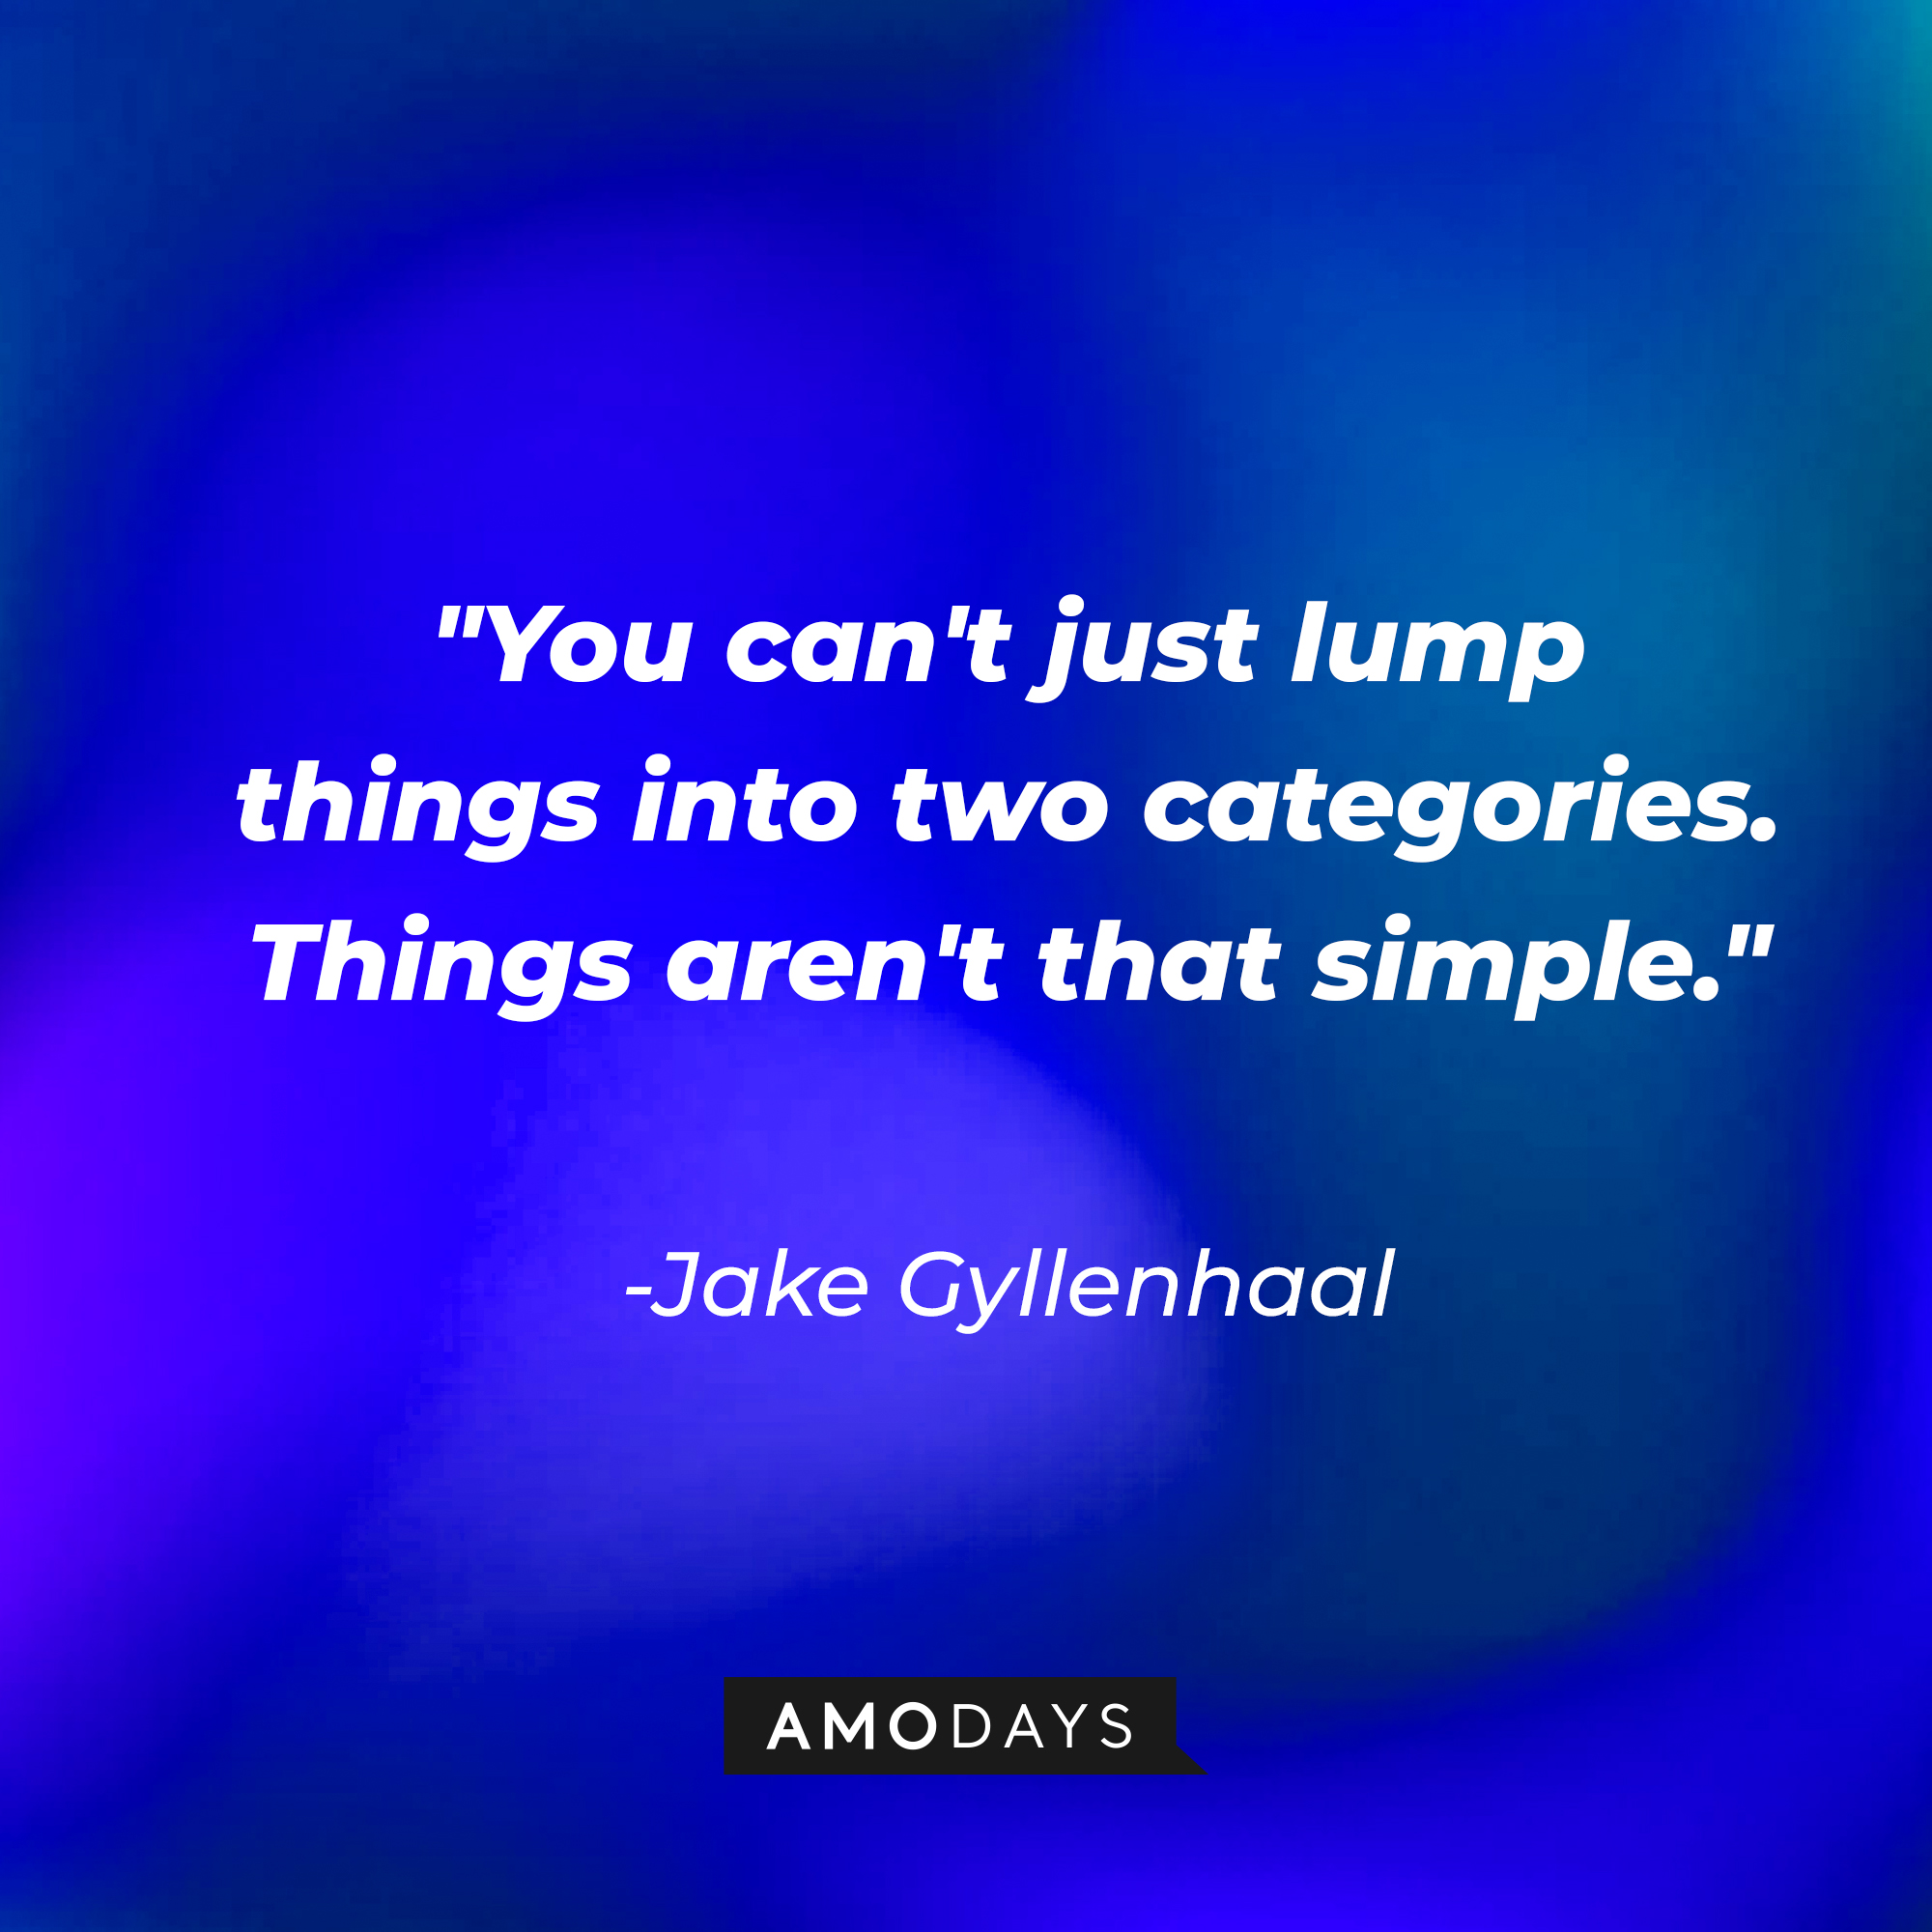 Jake Gyllenhaal's quote: "You can't just lump things into two categories. Things aren't that simple." | Source: AmoDays